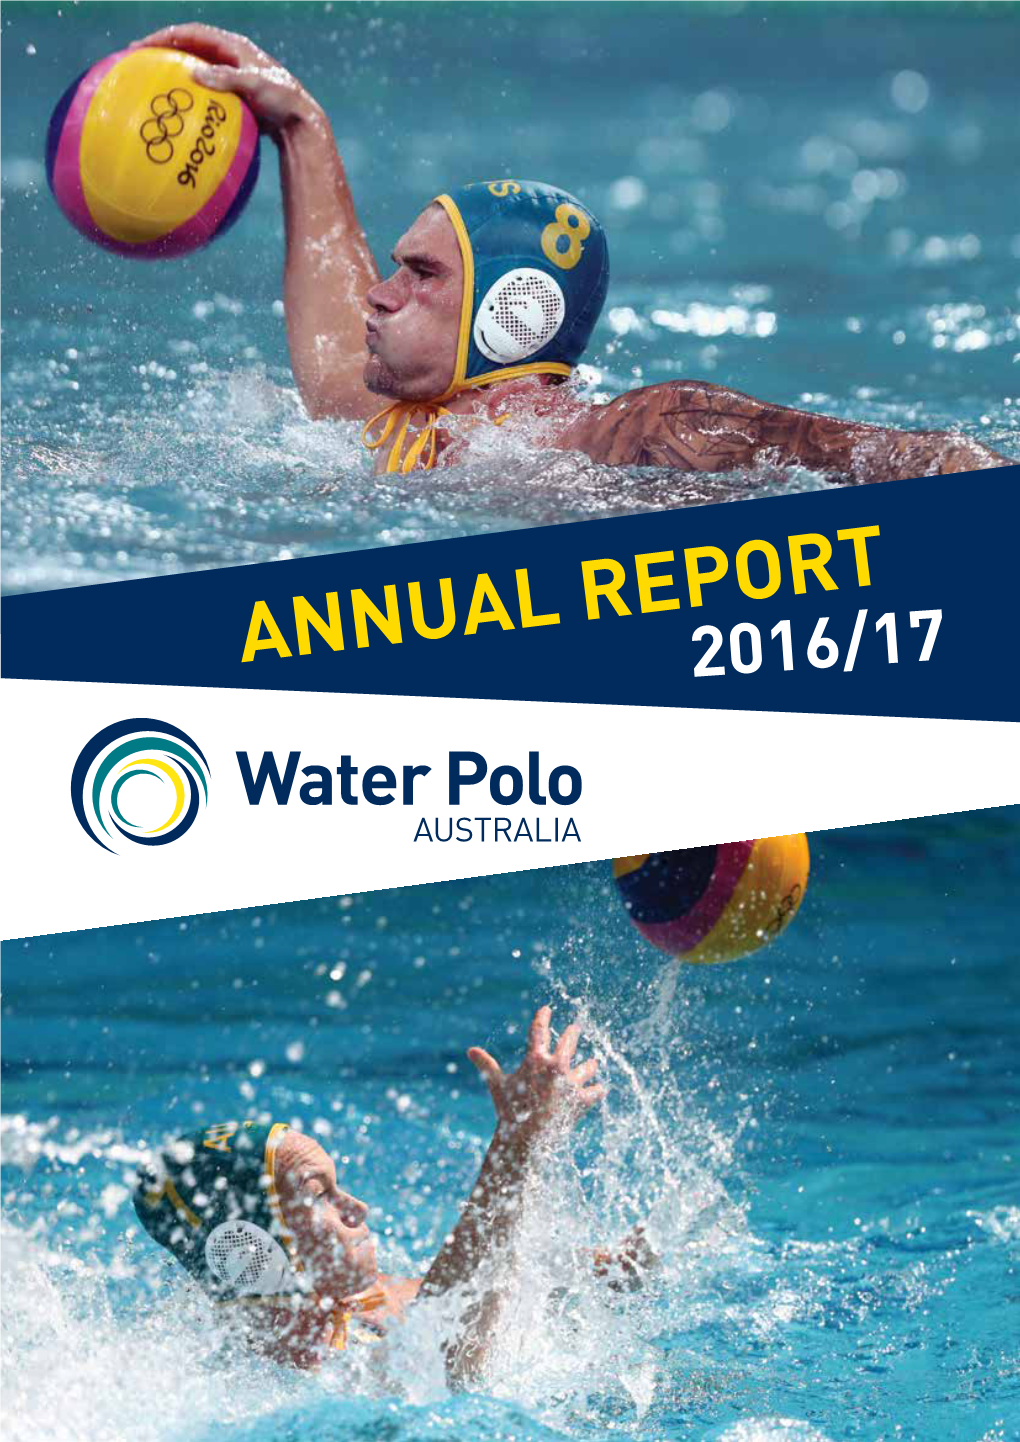 Annual Report2016/17 Wpa Would Like to Thank the Following Partners